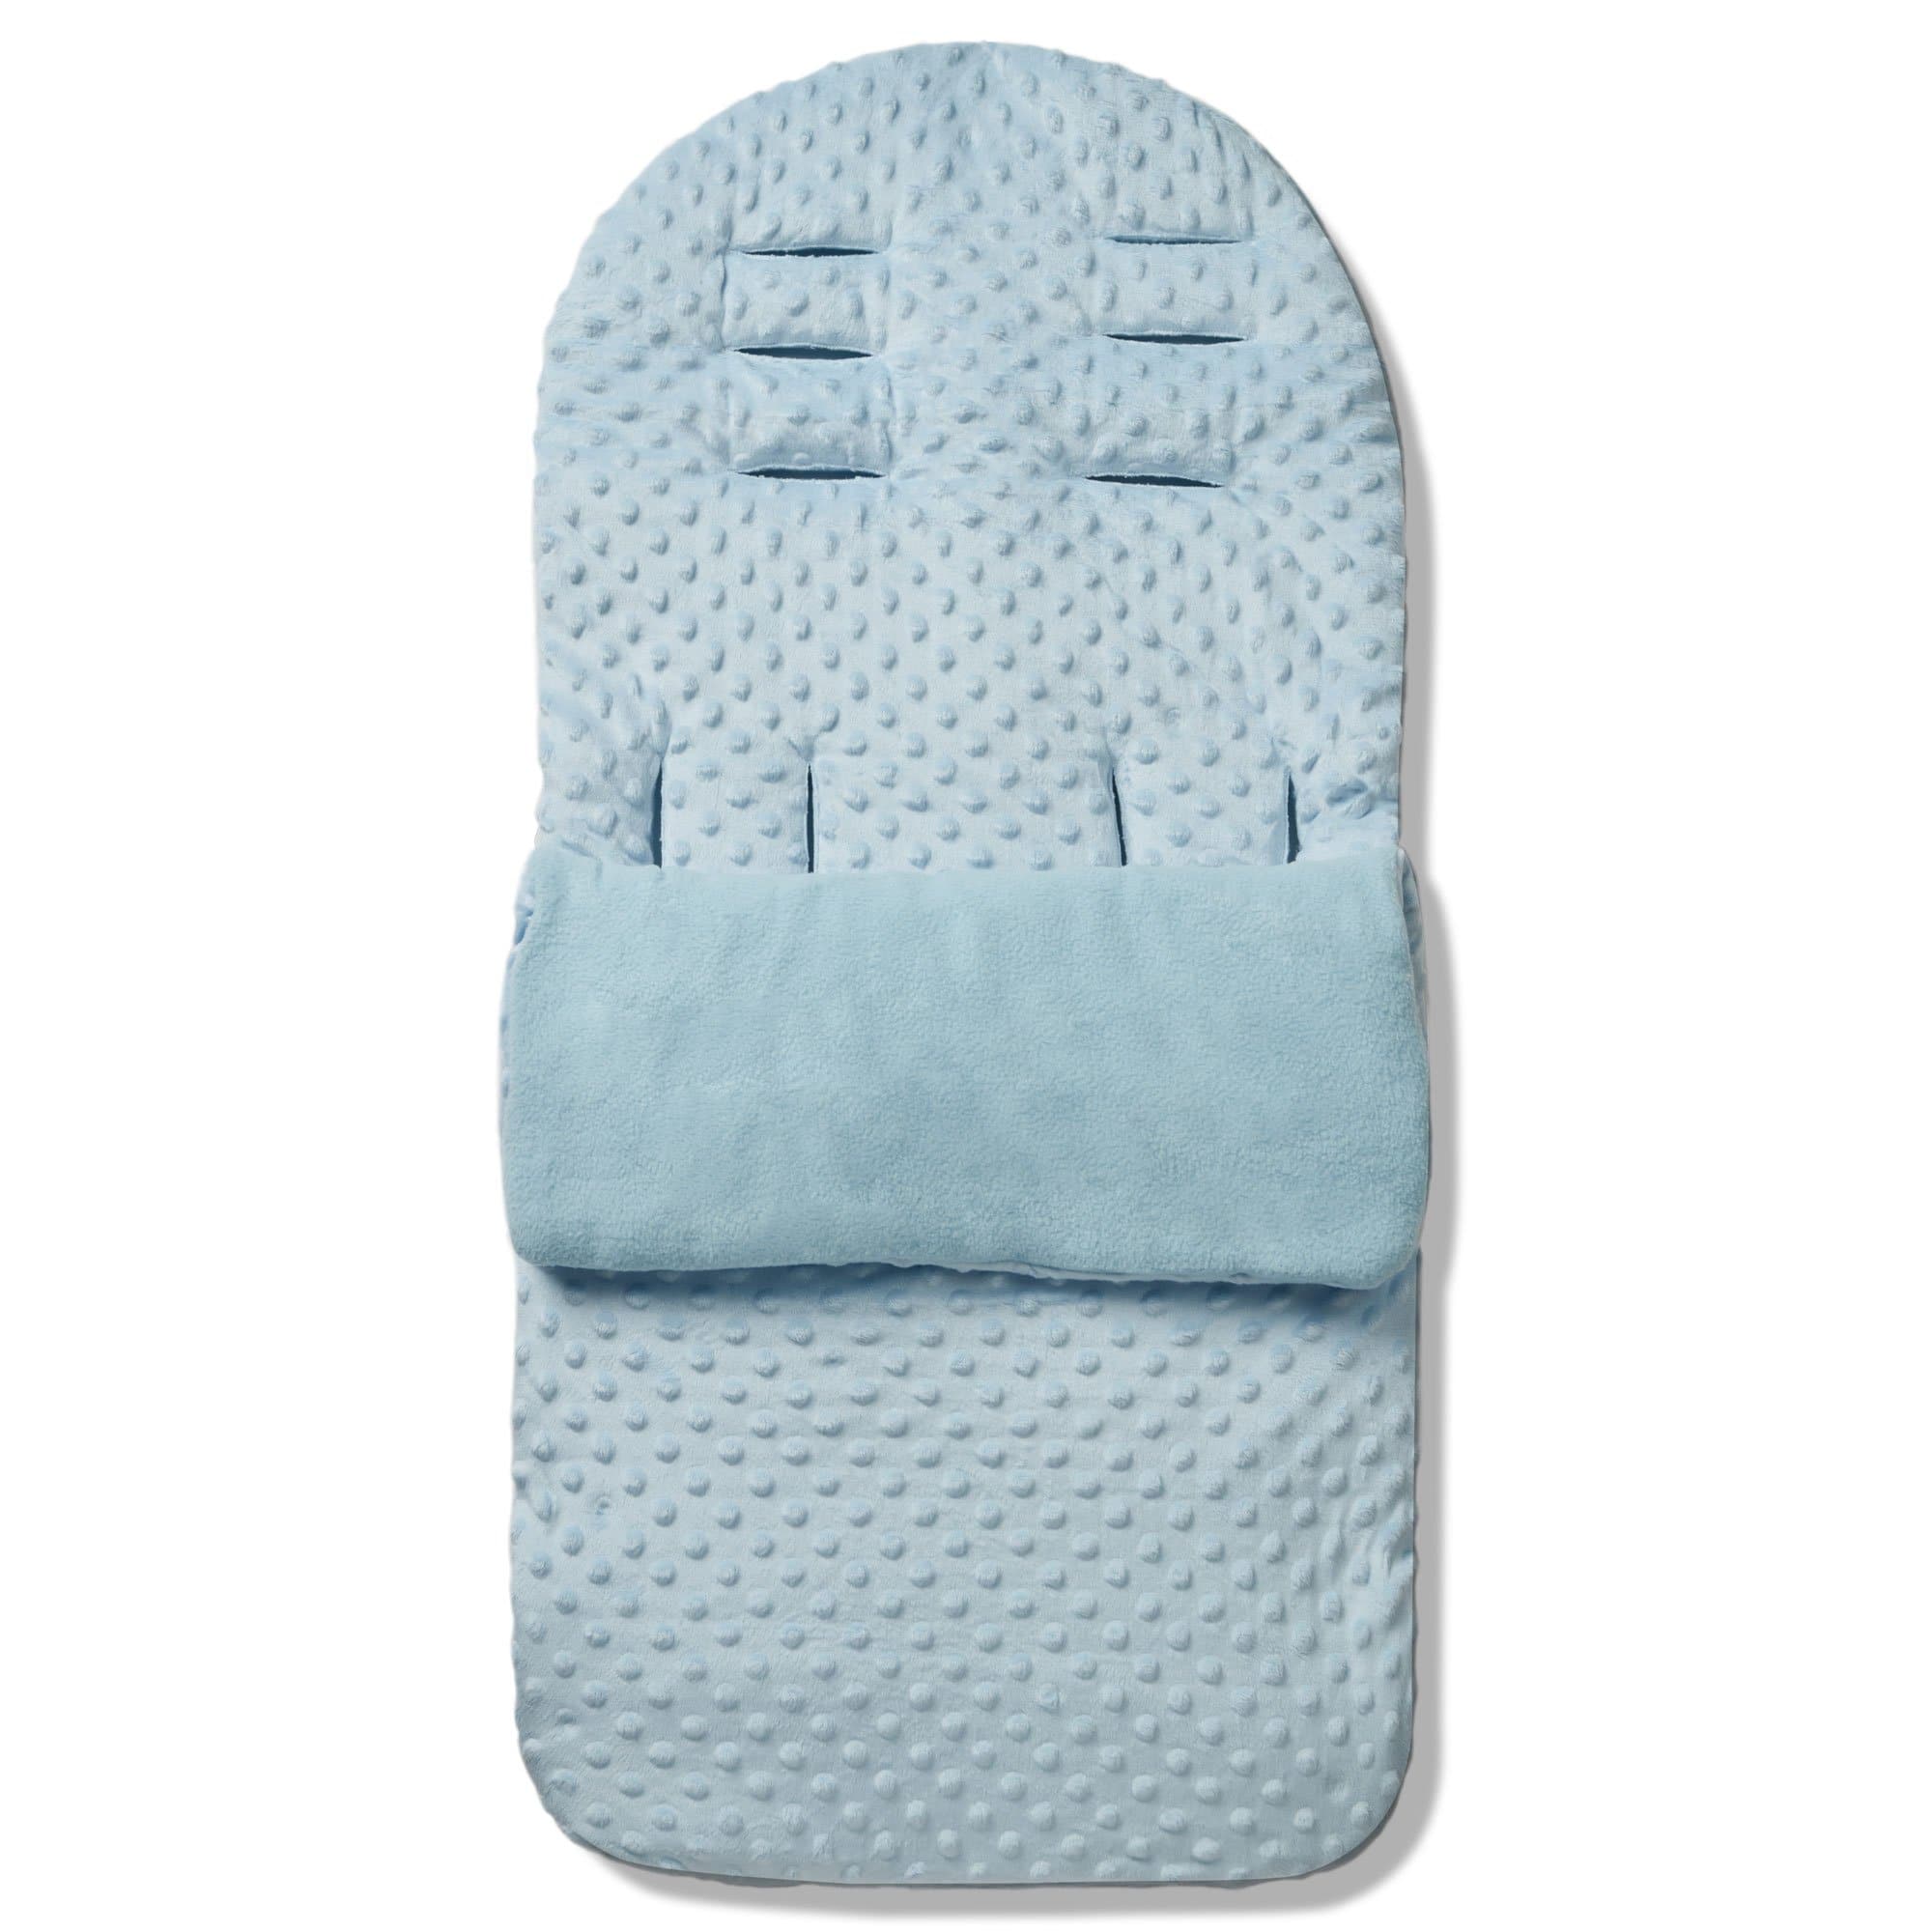 Dimple Footmuff / Cosy Toes Compatible with Obaby - Blue / Fits All Models | For Your Little One